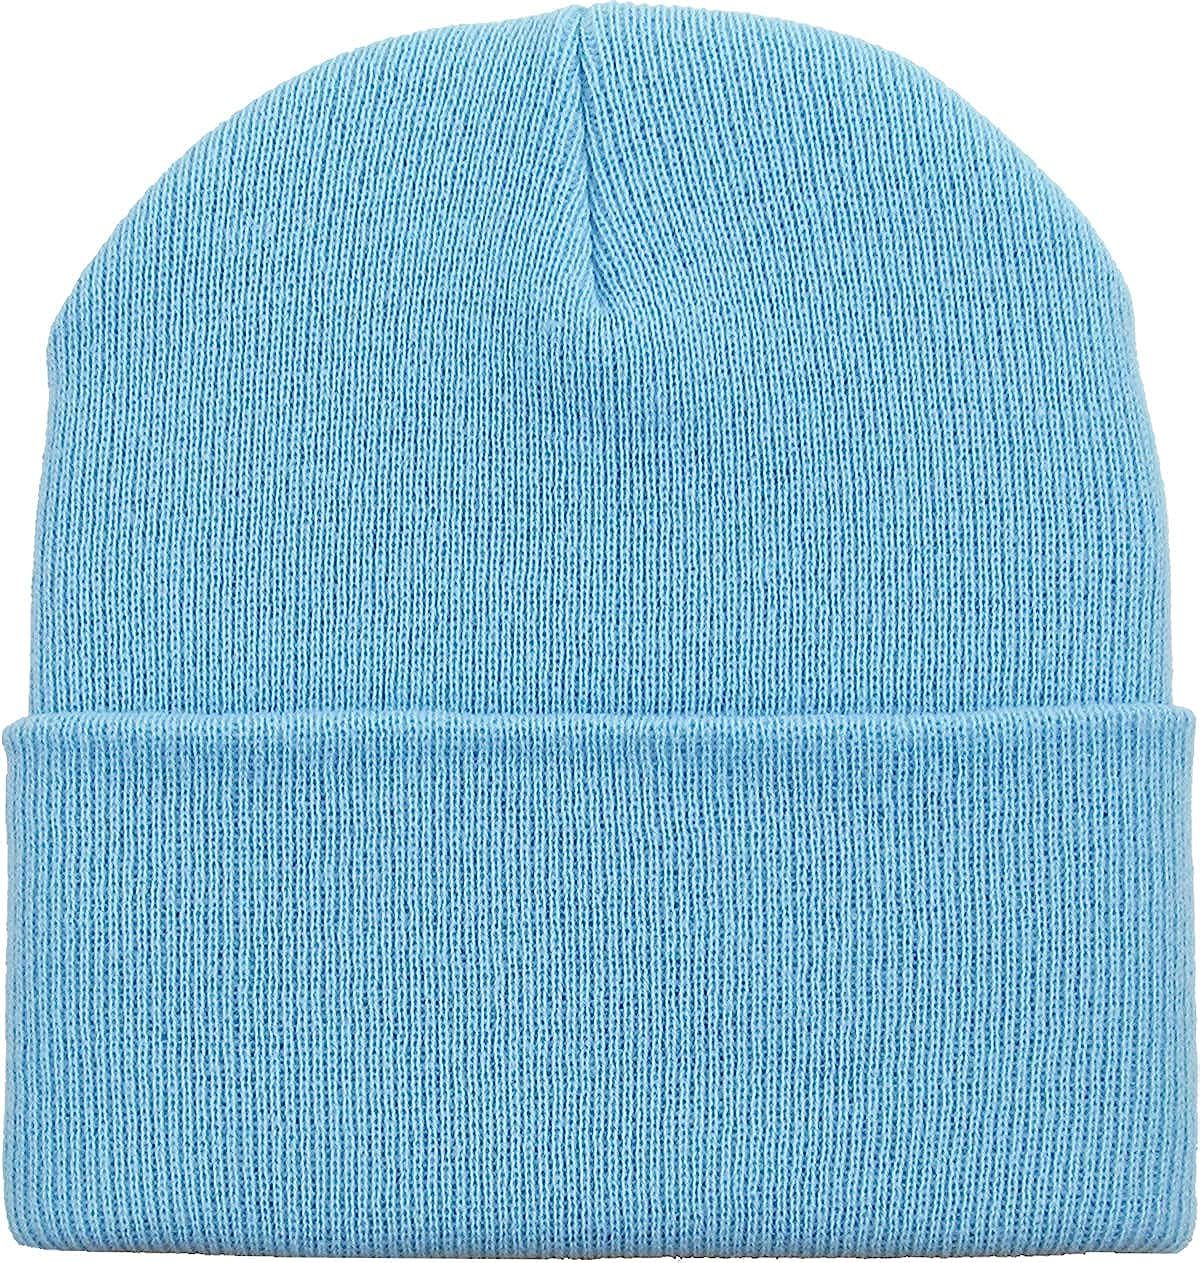 Thick and Warm Mens Daily Cuffed Beanie OR Slouchy Made in USA for USA Knit HAT Cap Womens Kids | Amazon (US)